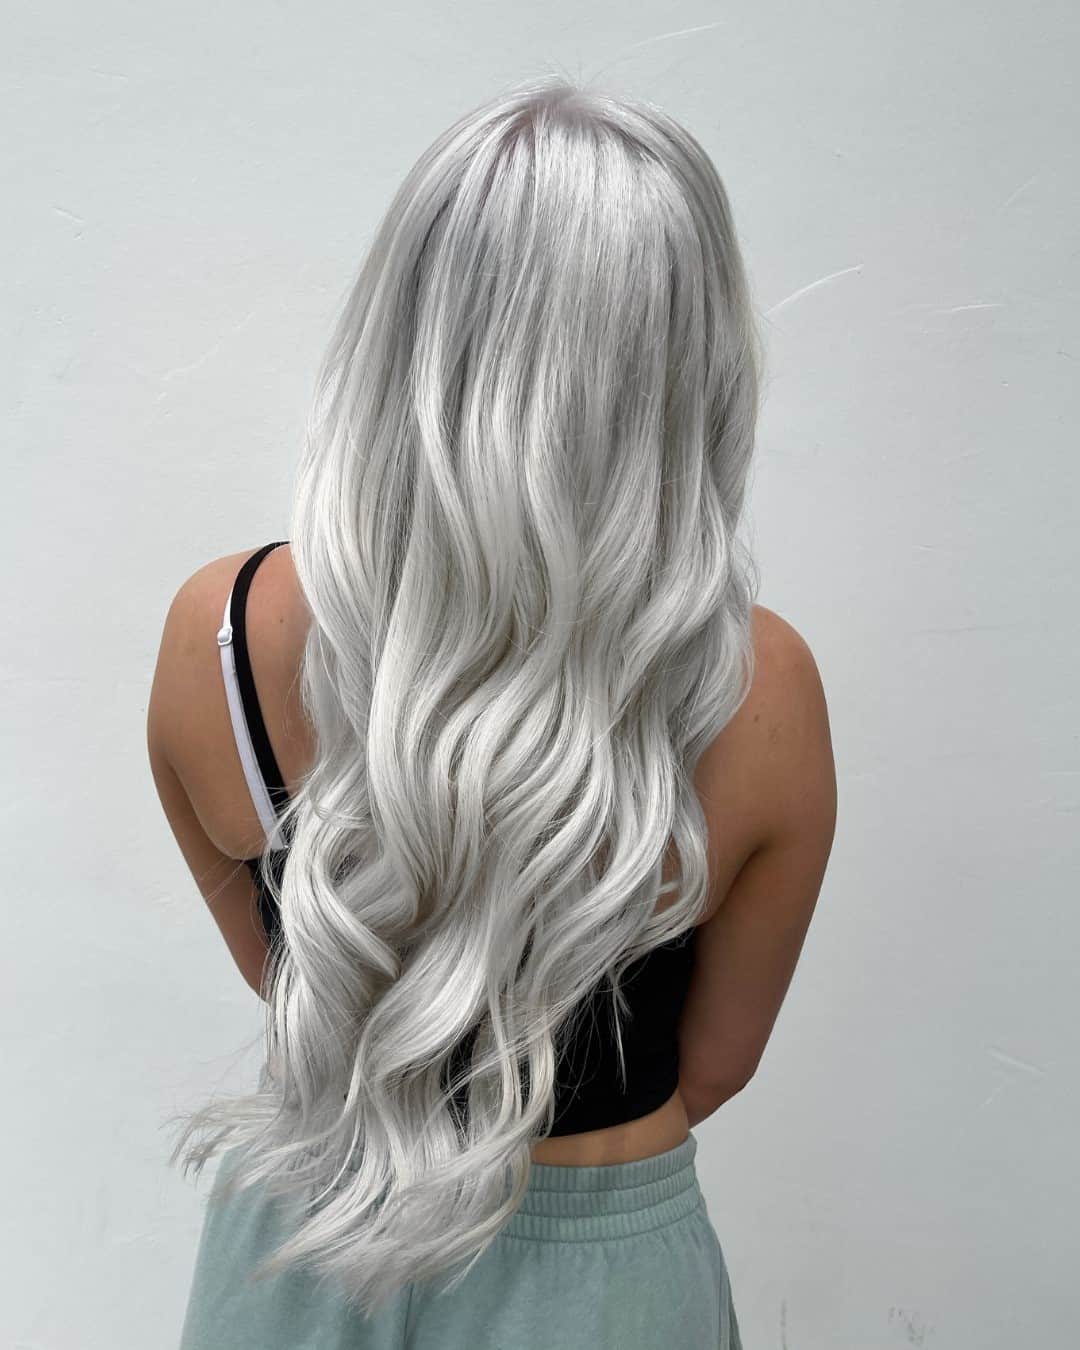 Gray Hair Styles Curly Look 